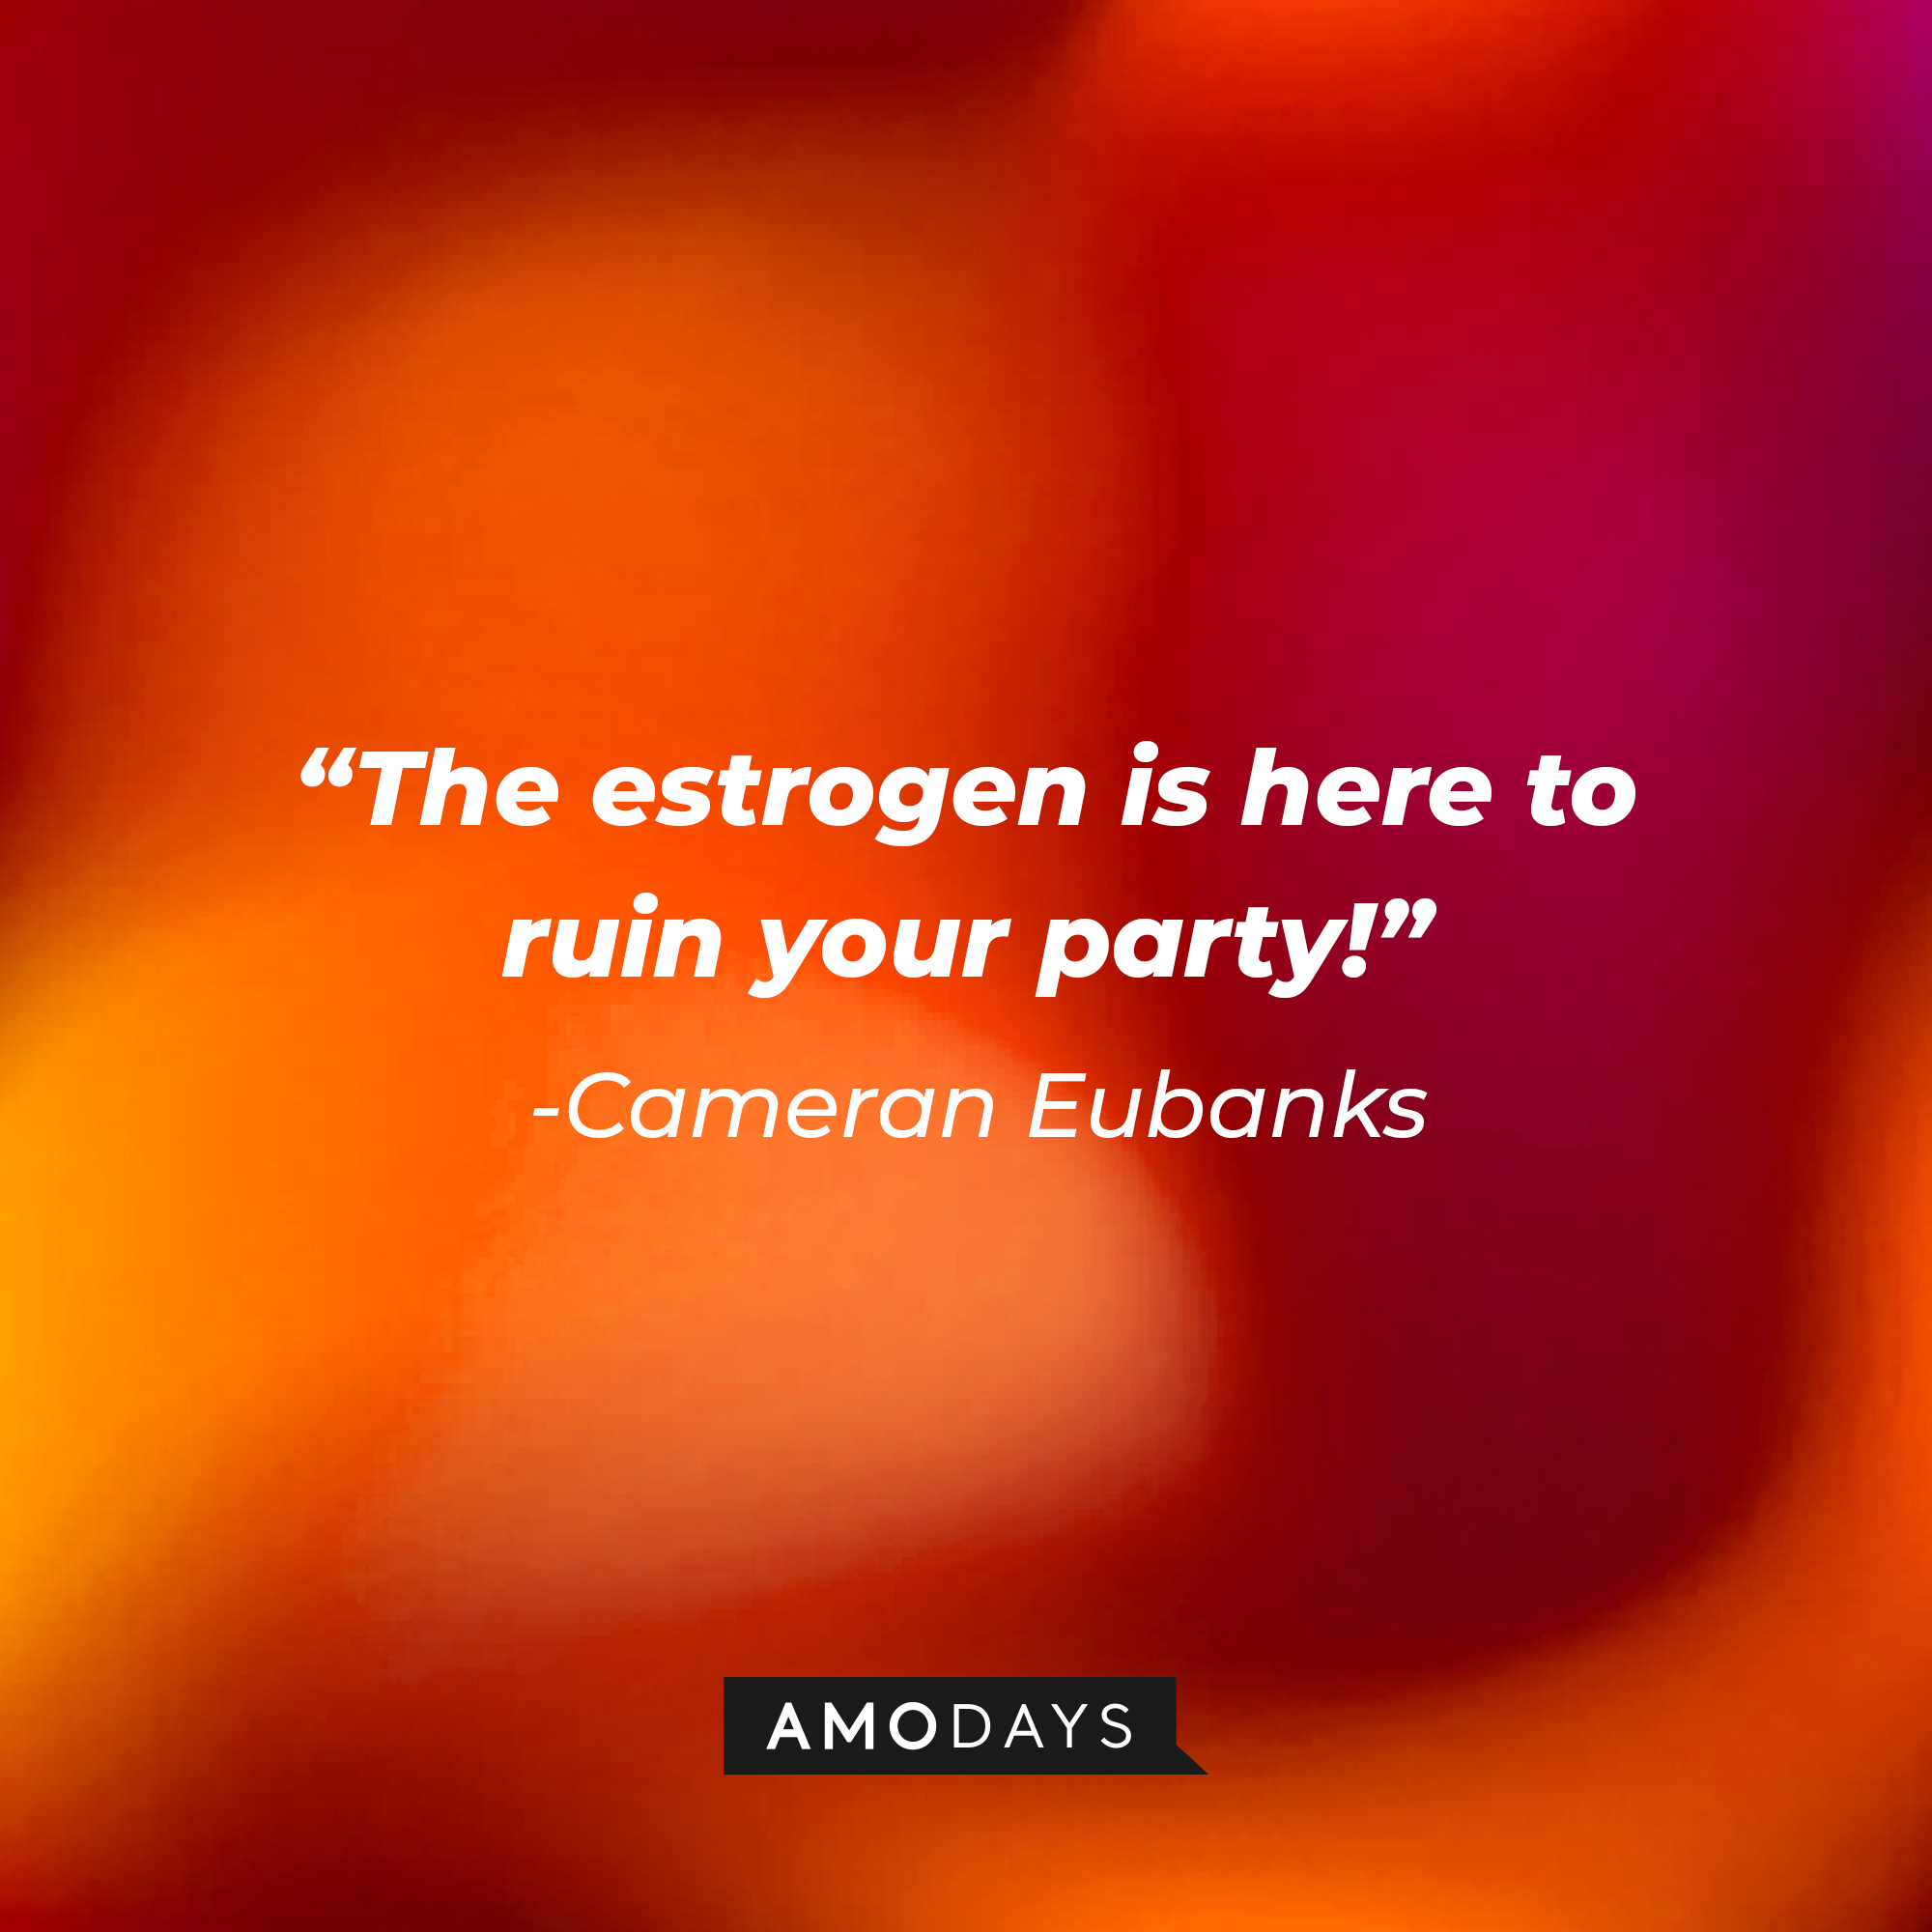 Cameran Eubanks' quote: "The estrogen is here to ruin your party!" | Source: AmoDays